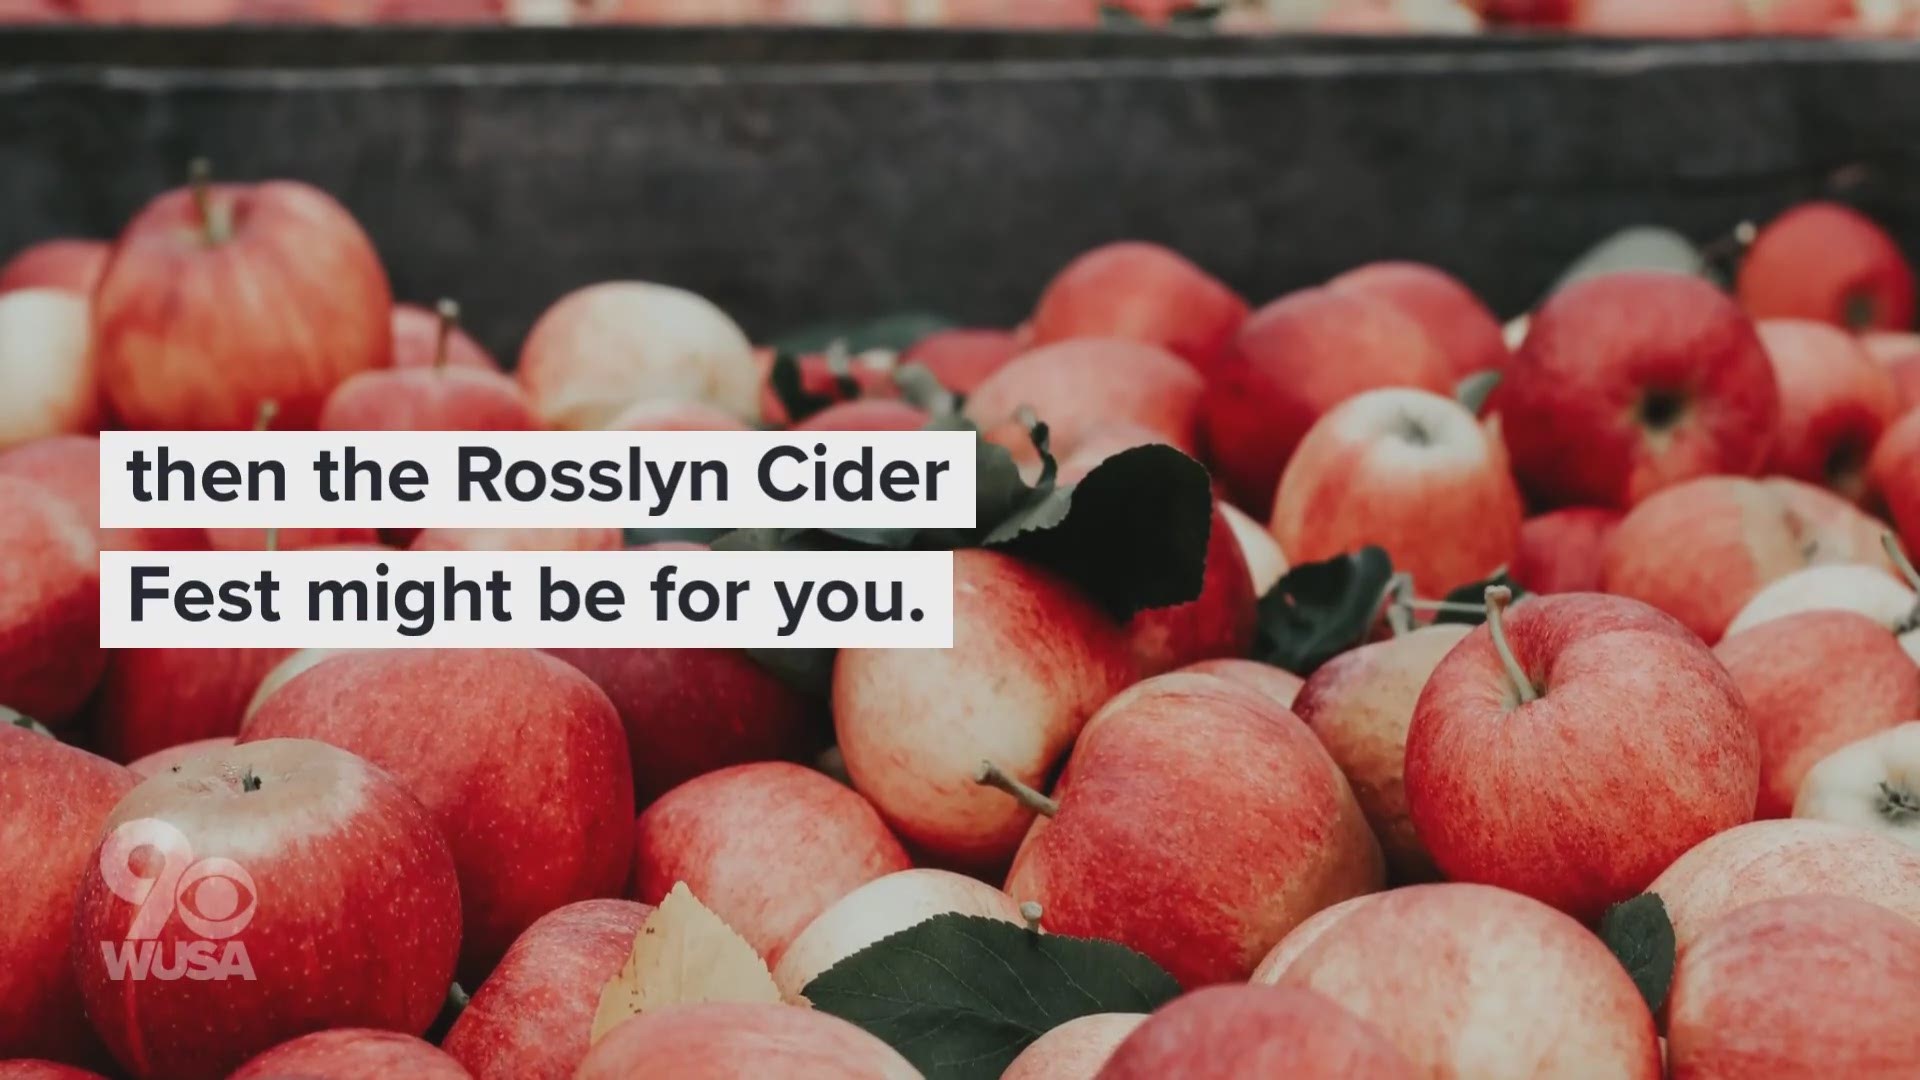 The Rosslyn Cider Fest is coming to Arlington Oct. 17, and features a pie-eating contest.